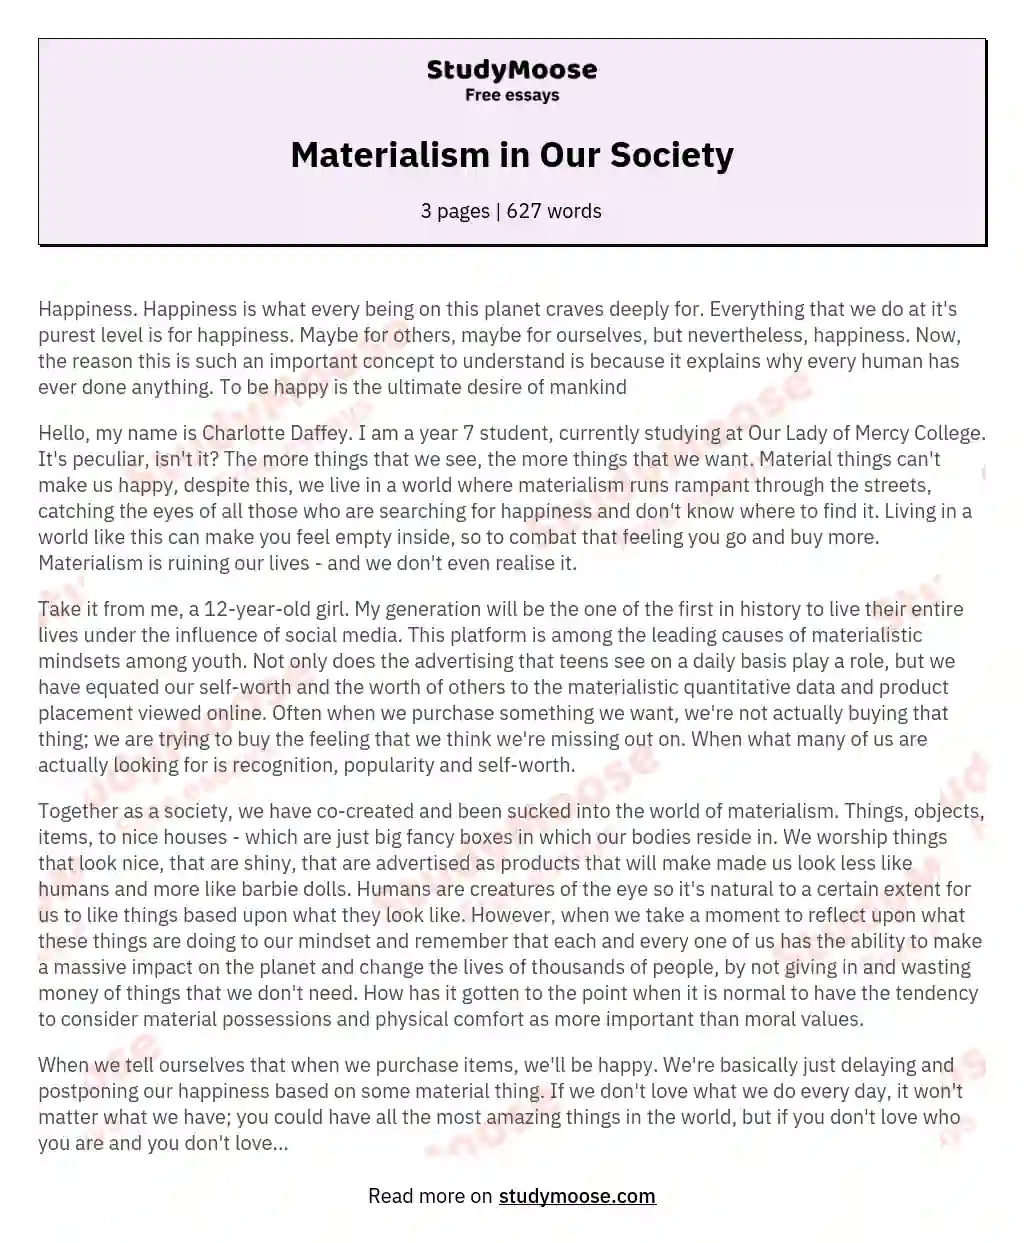 materialism in society essay